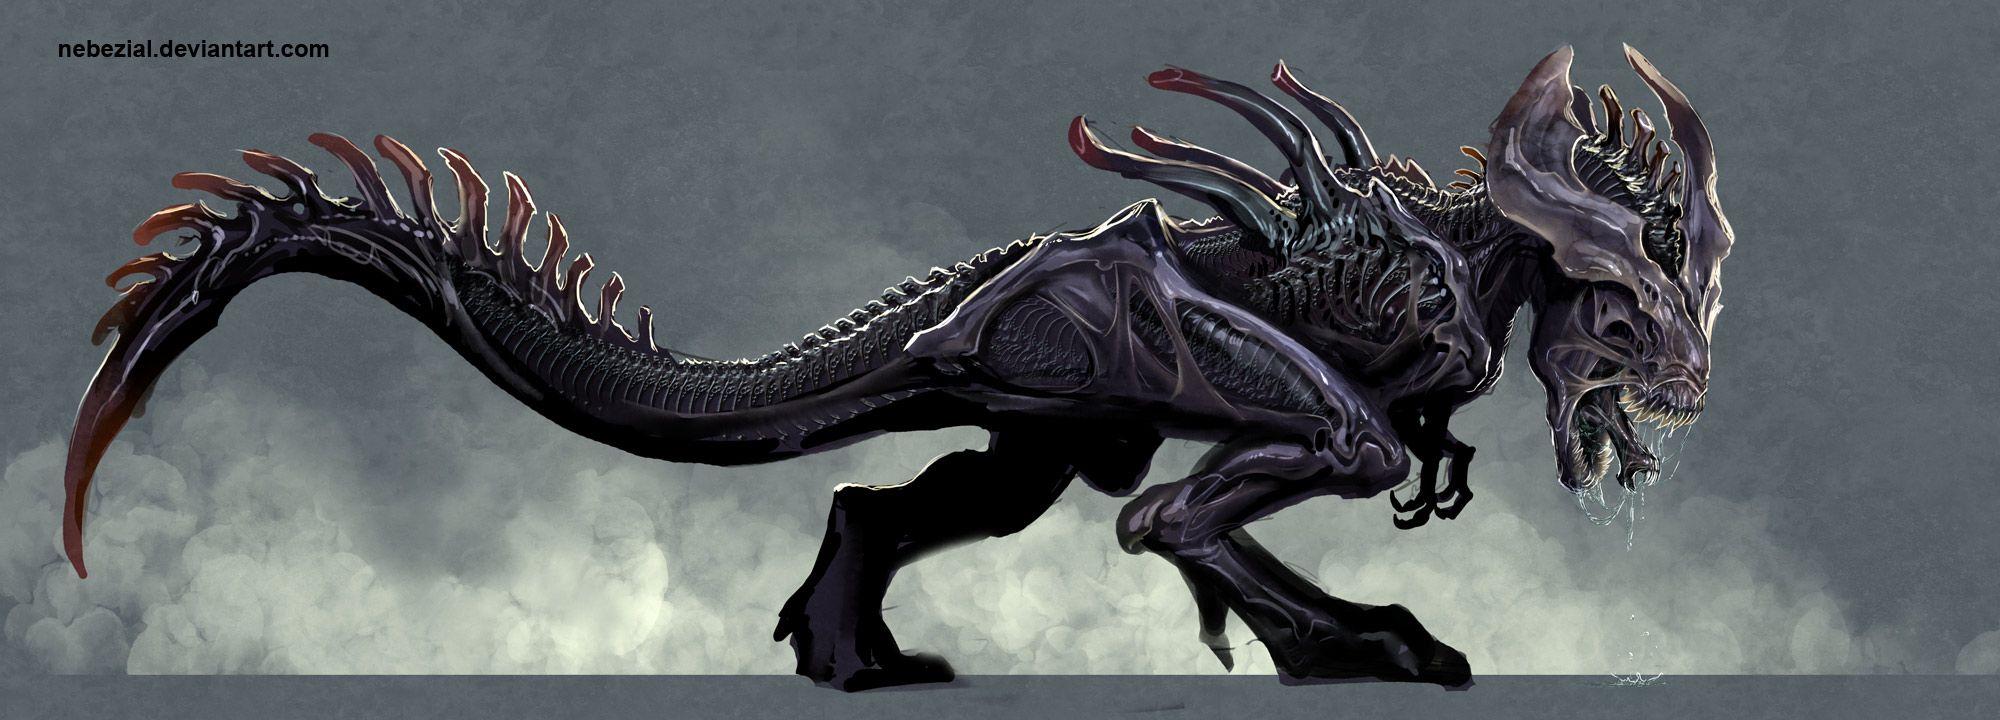 Whats You Favorite Alien In Fiction?-Topic